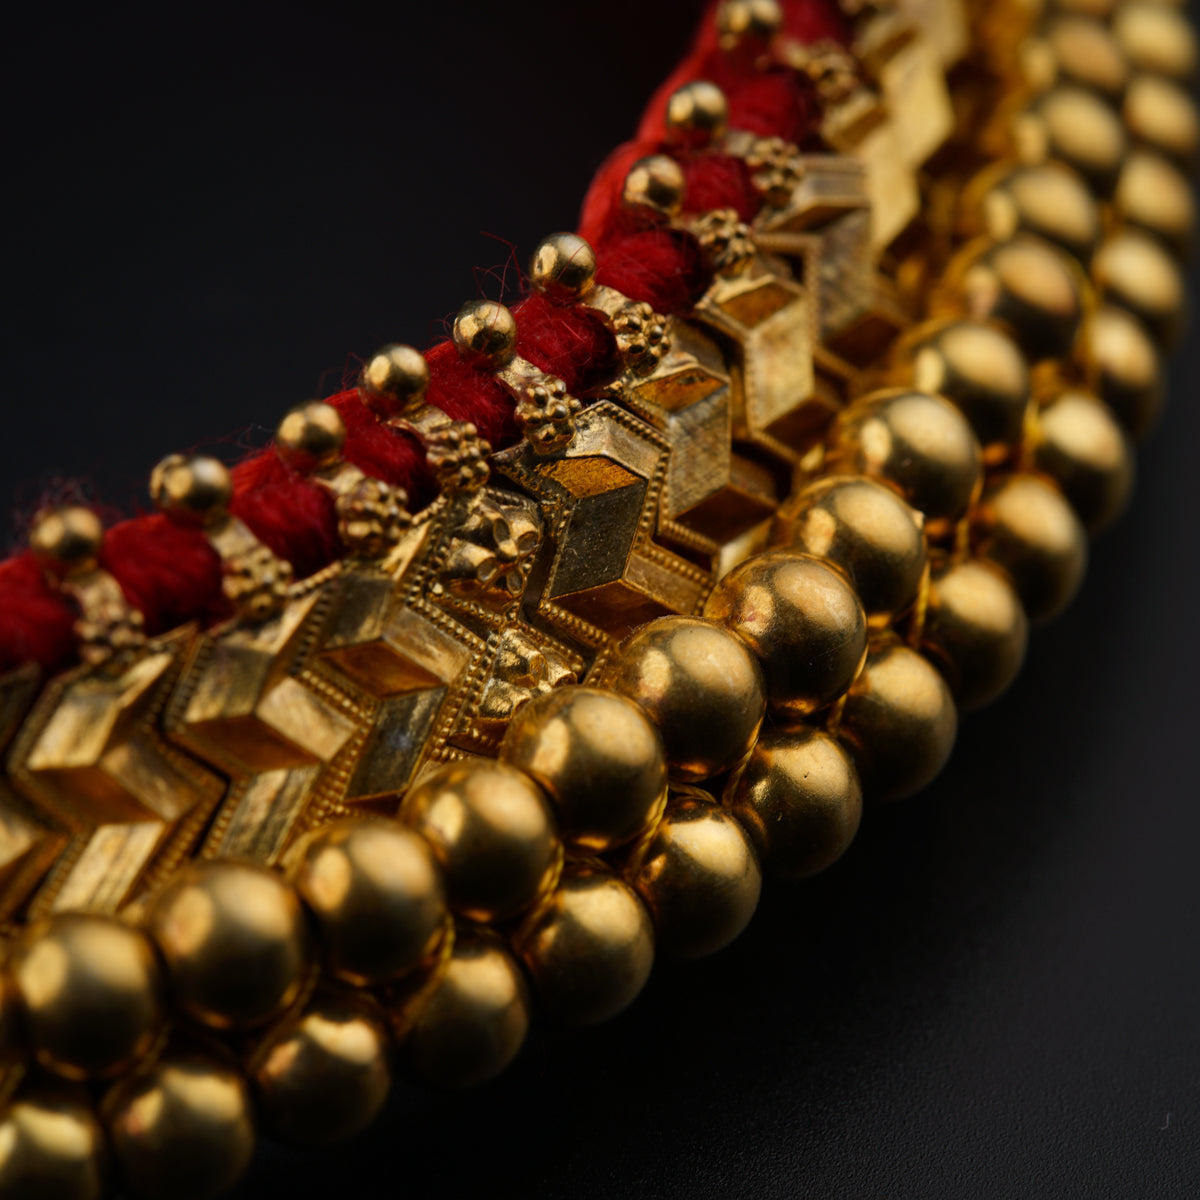 a close up of a gold and red necklace